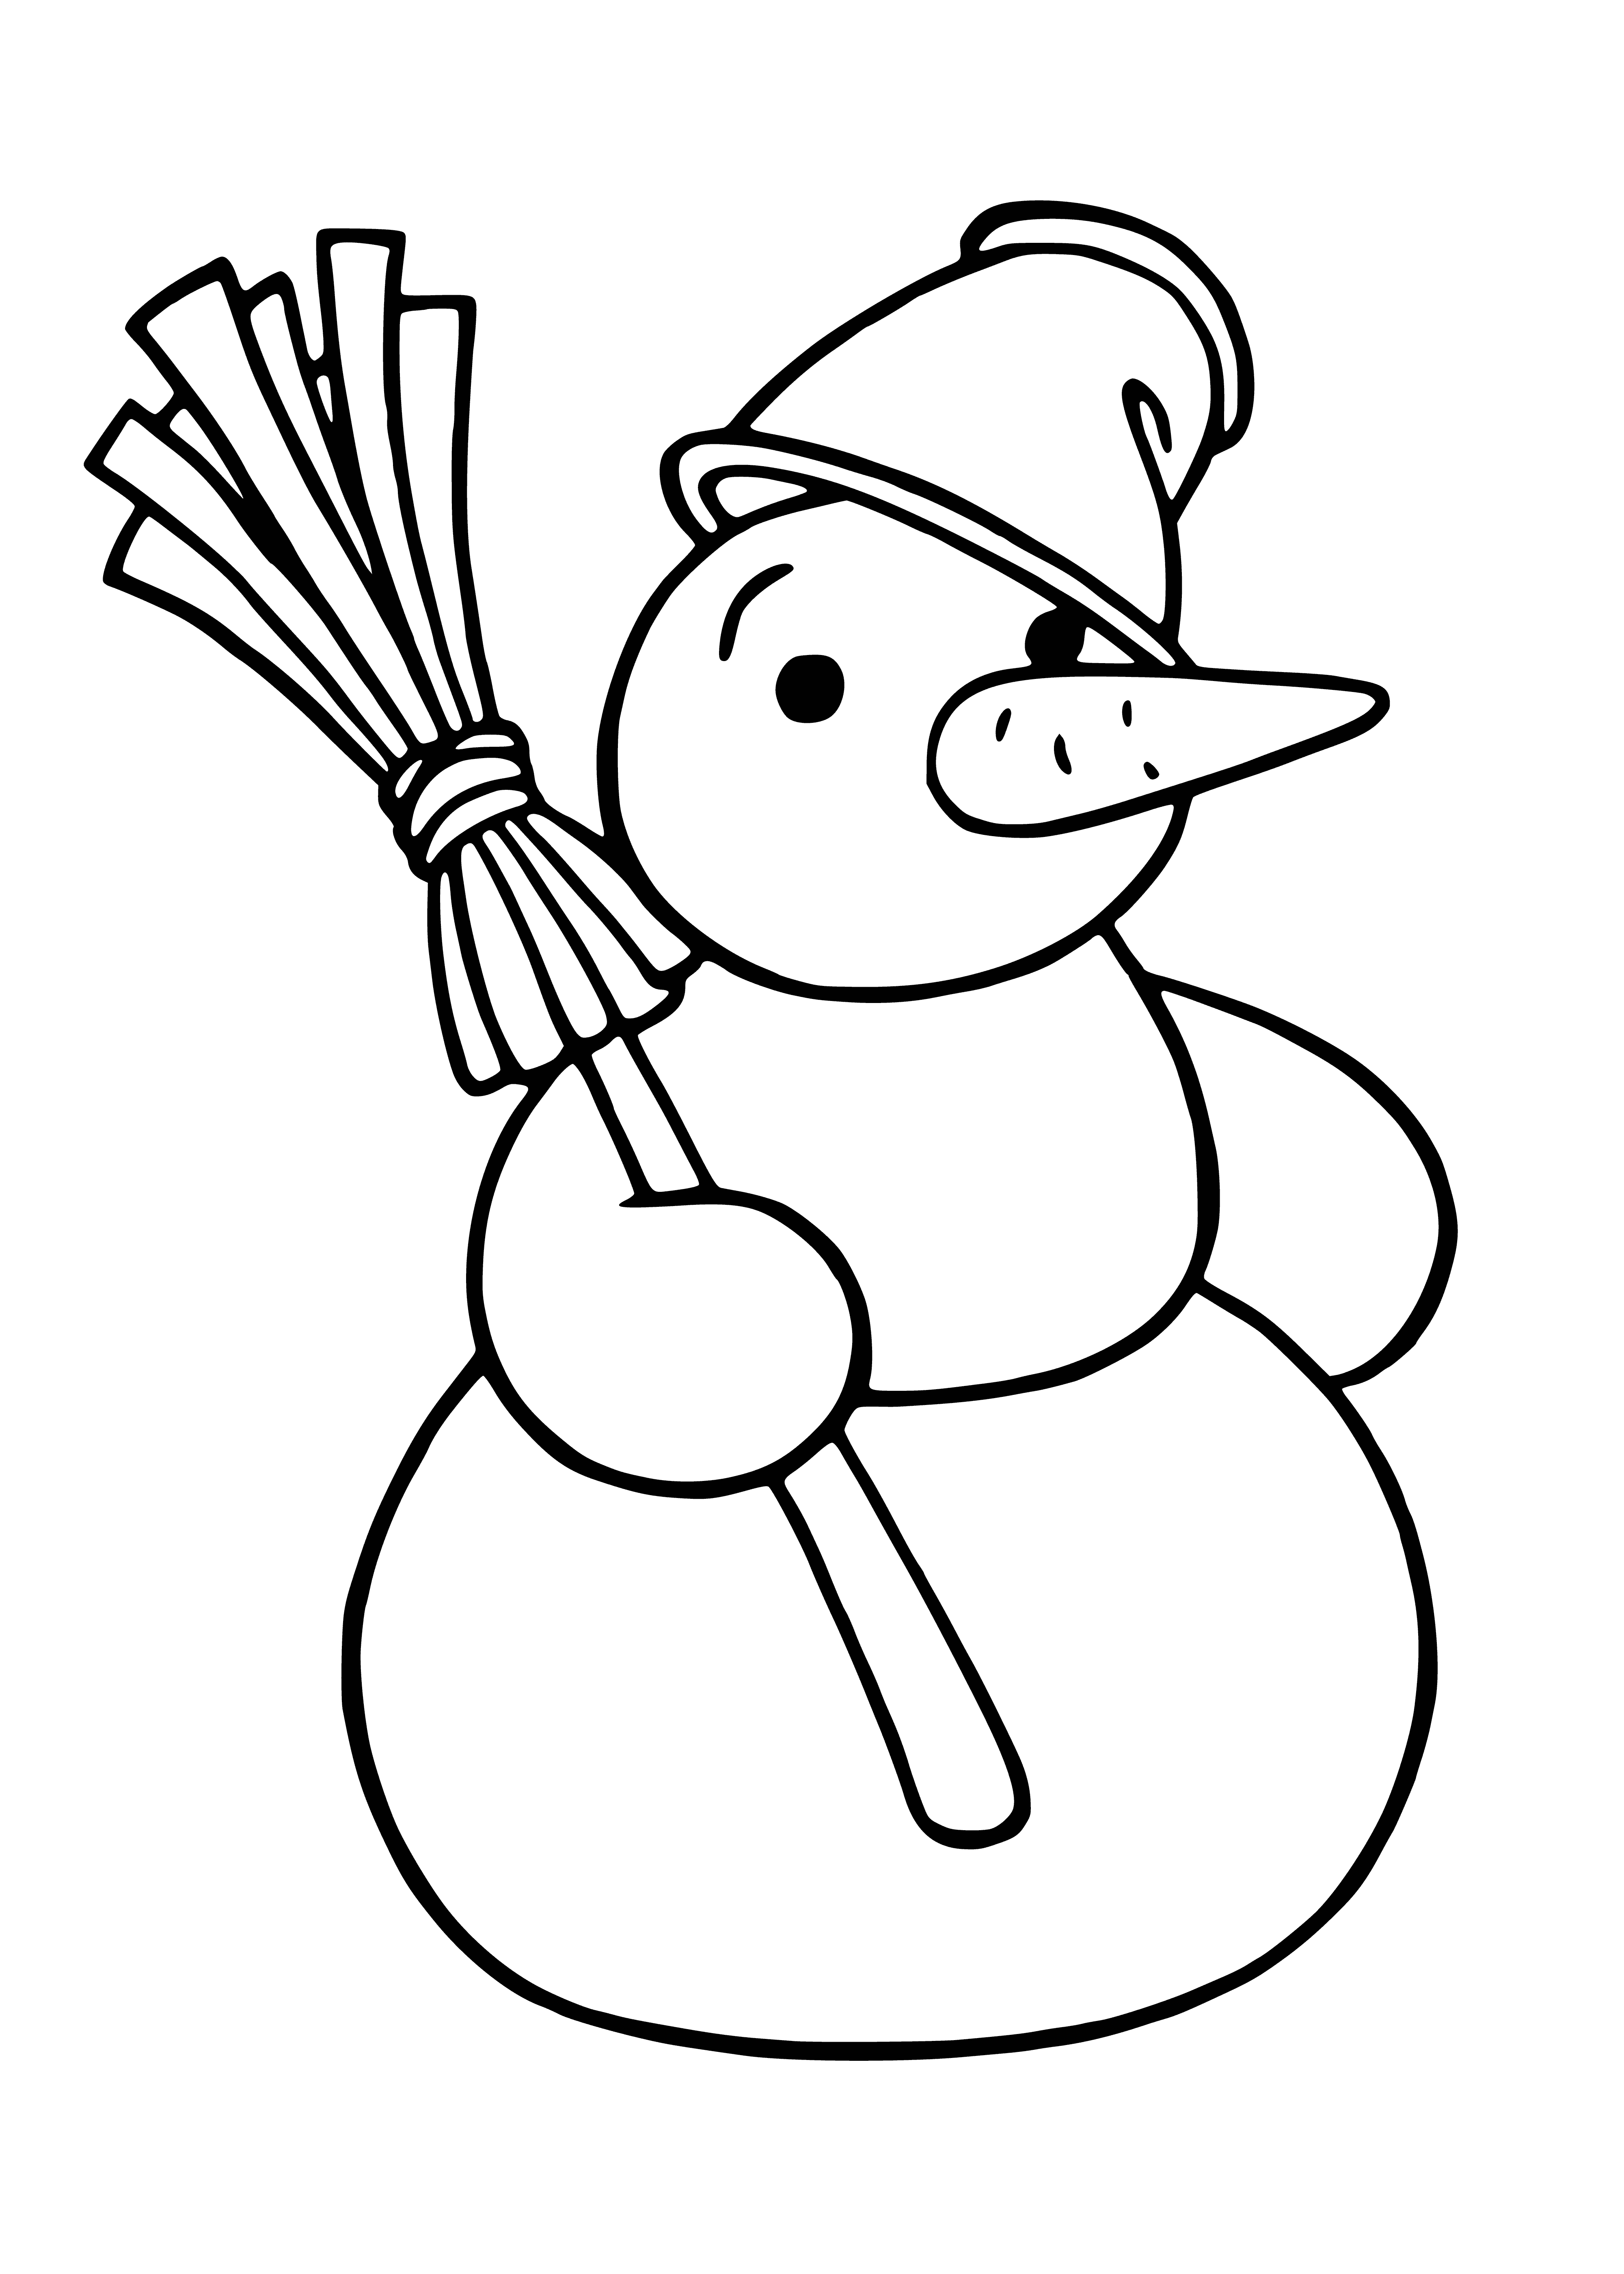 Snowman has carrot nose, coal eyes & mouth, red scarf, & twig arms.